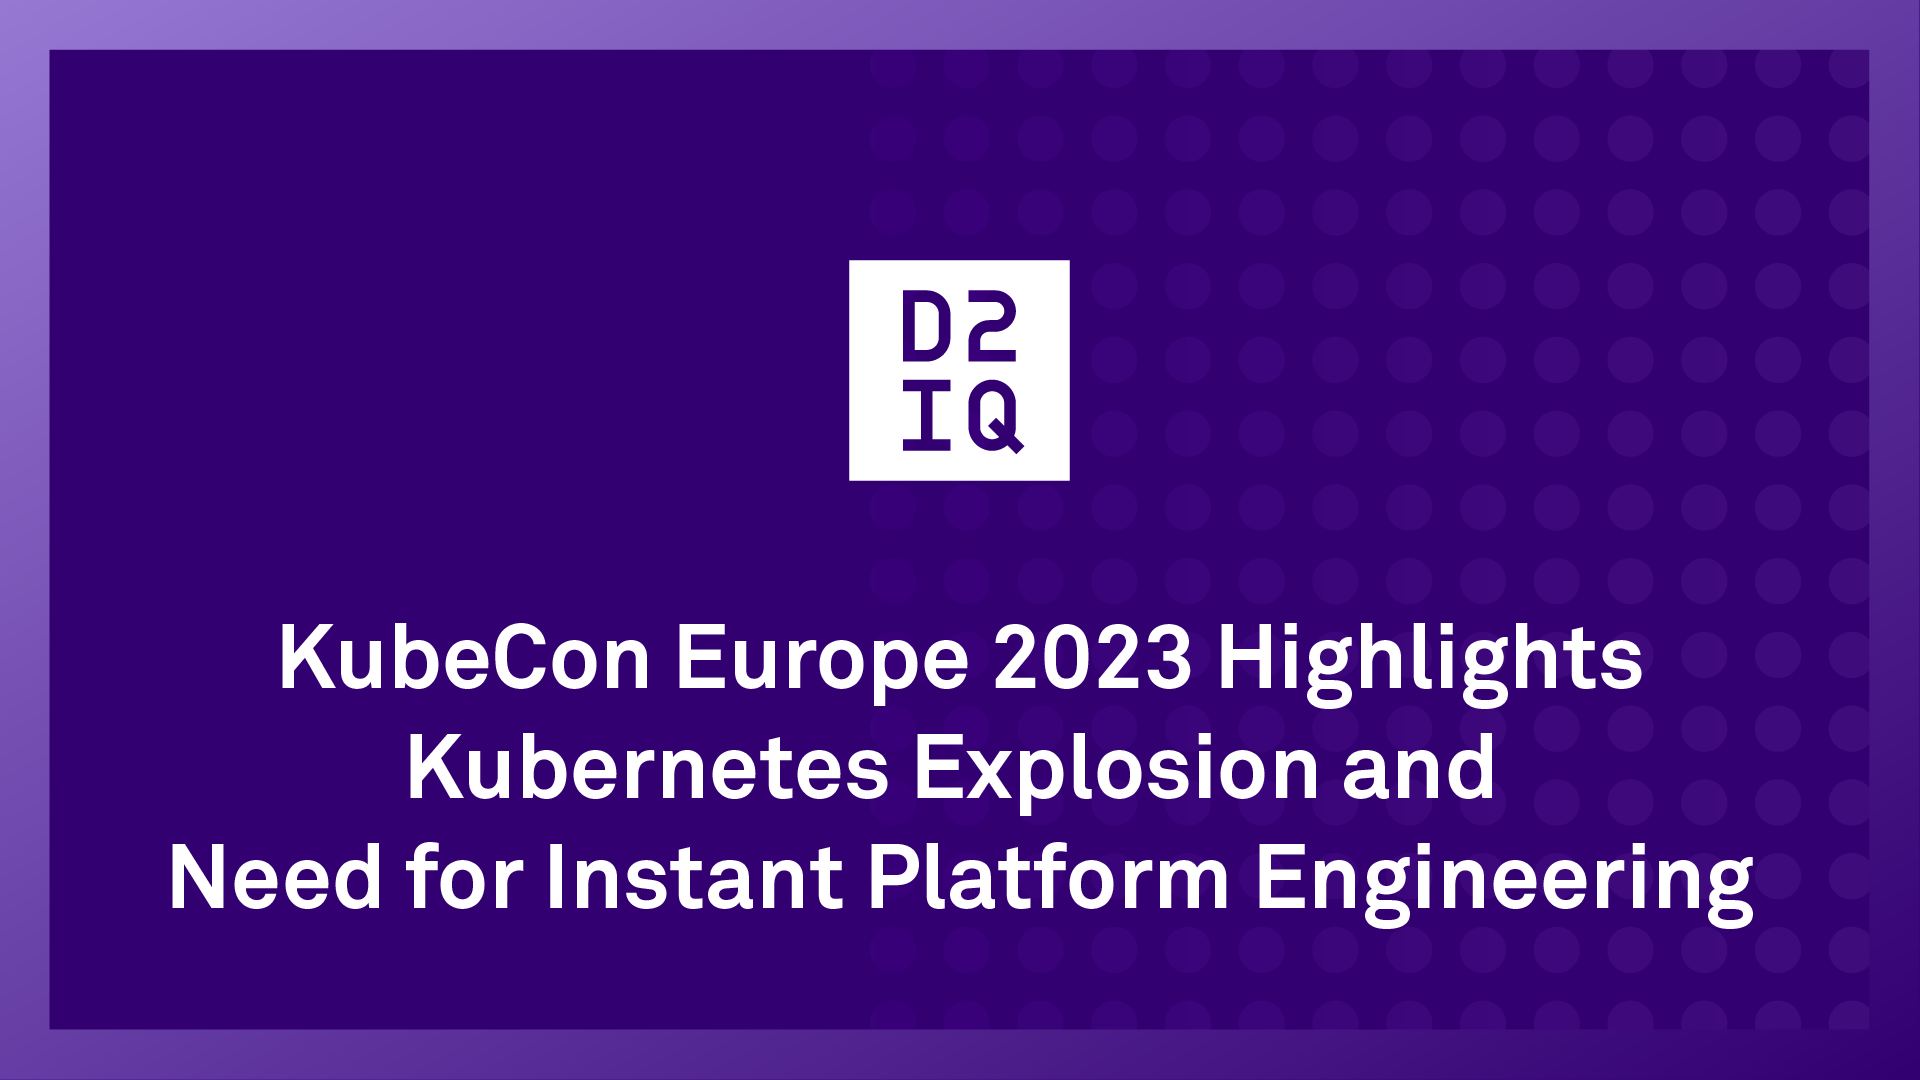 KubeCon Europe 2023 Highlights Kubernetes Explosion and Need for Instant Platform Engineering